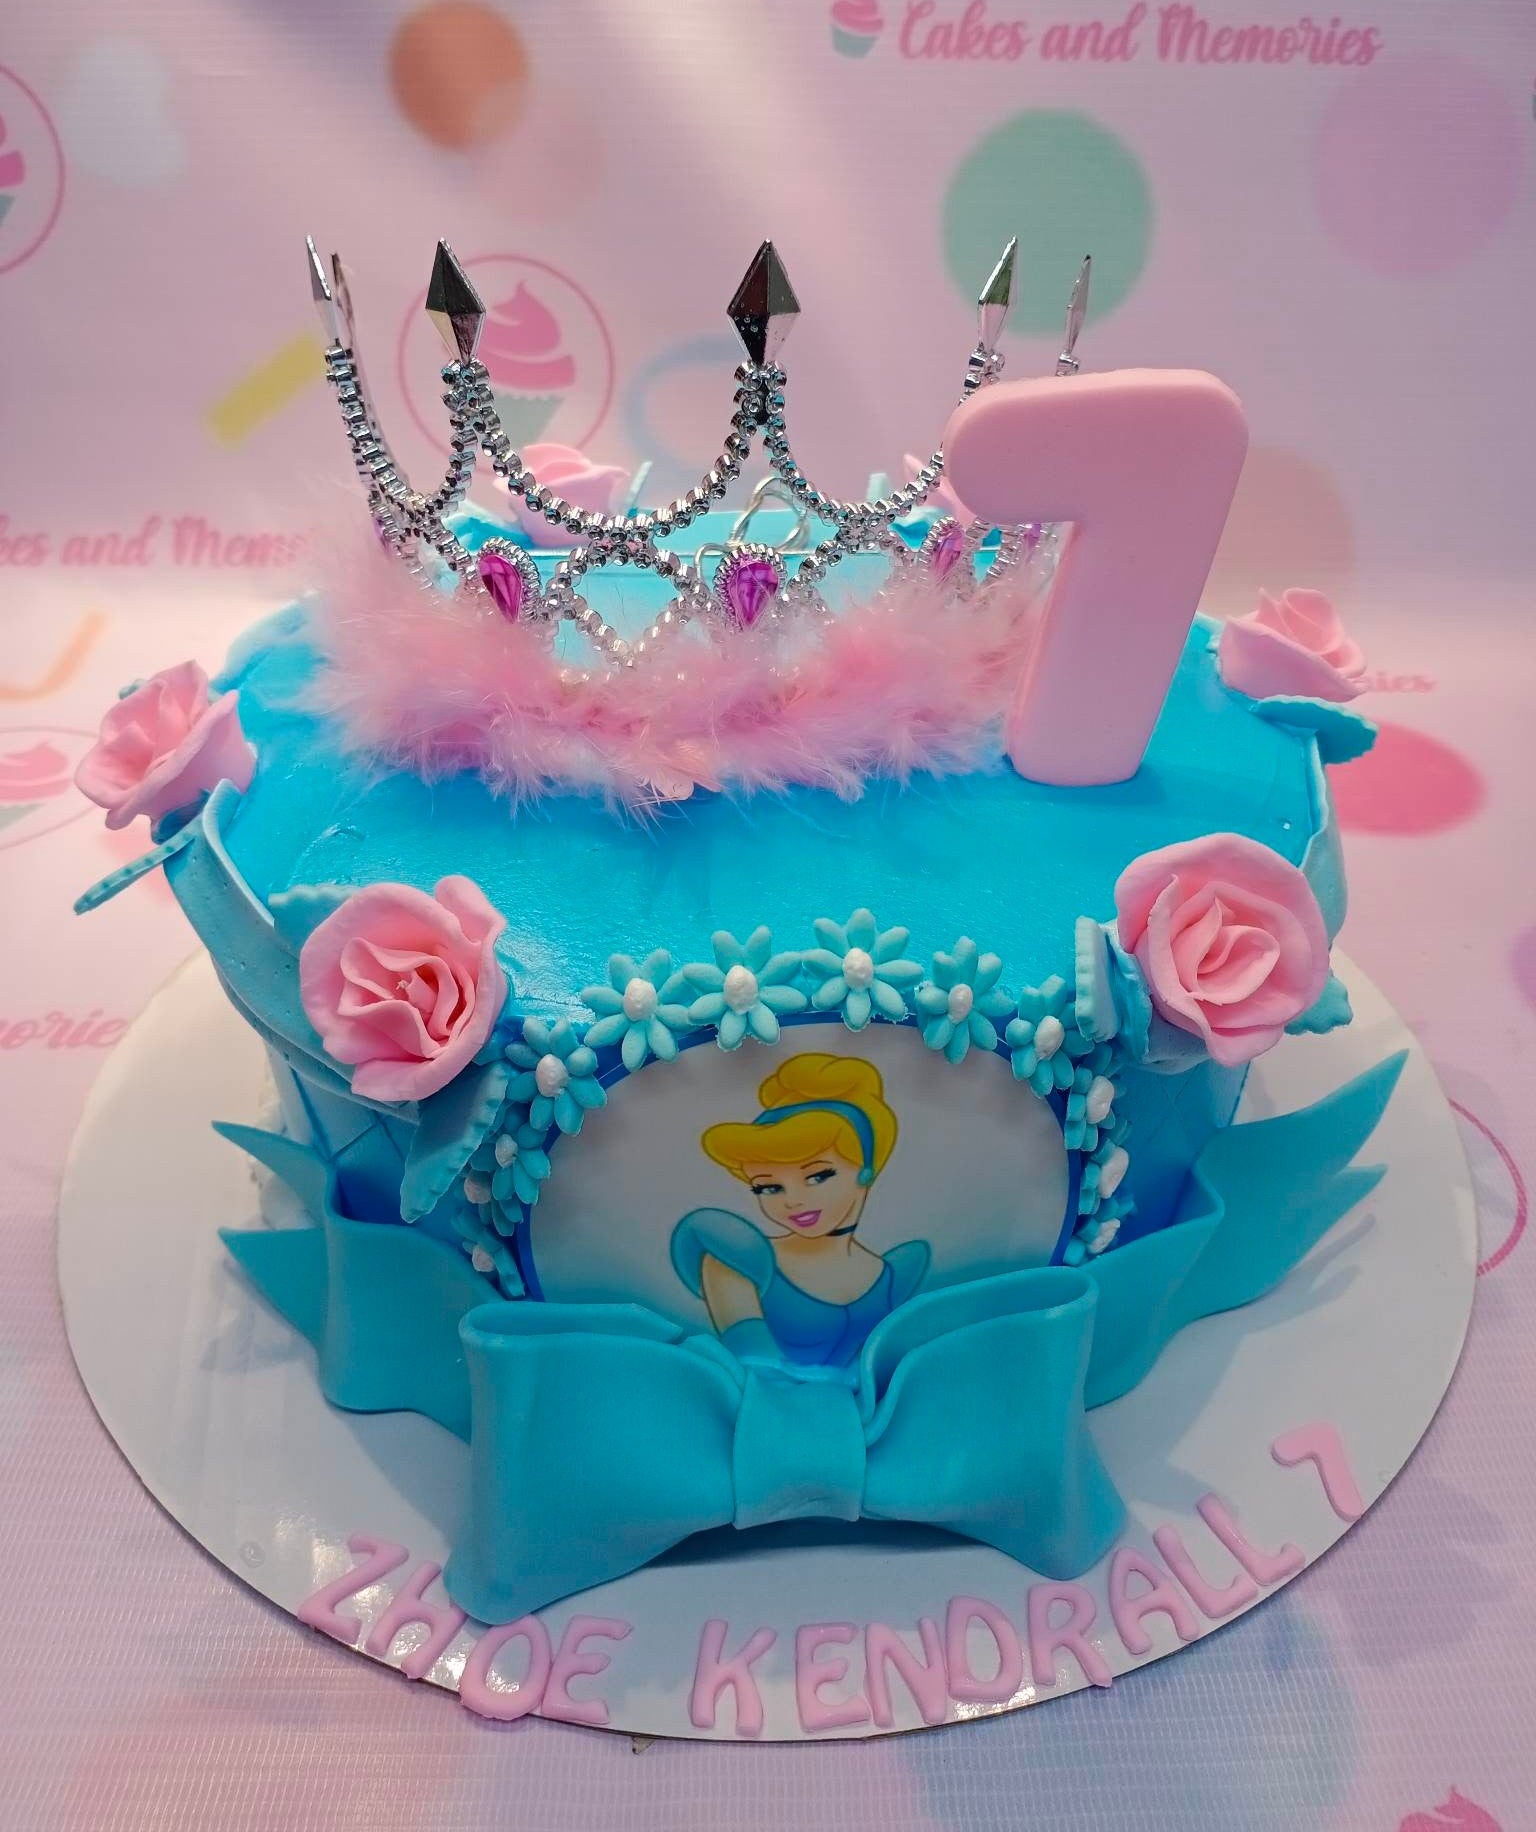 This beautiful Cinderella-themed cake is an excellent choice for any baby's 7th birthday. Its soft blue and pink color scheme and intricate crown topping give it a cute and elegant look, perfect for the special Disney Princess in your life. This custom-made cake is guaranteed to bring a wonderful surprise to your little one's special day.